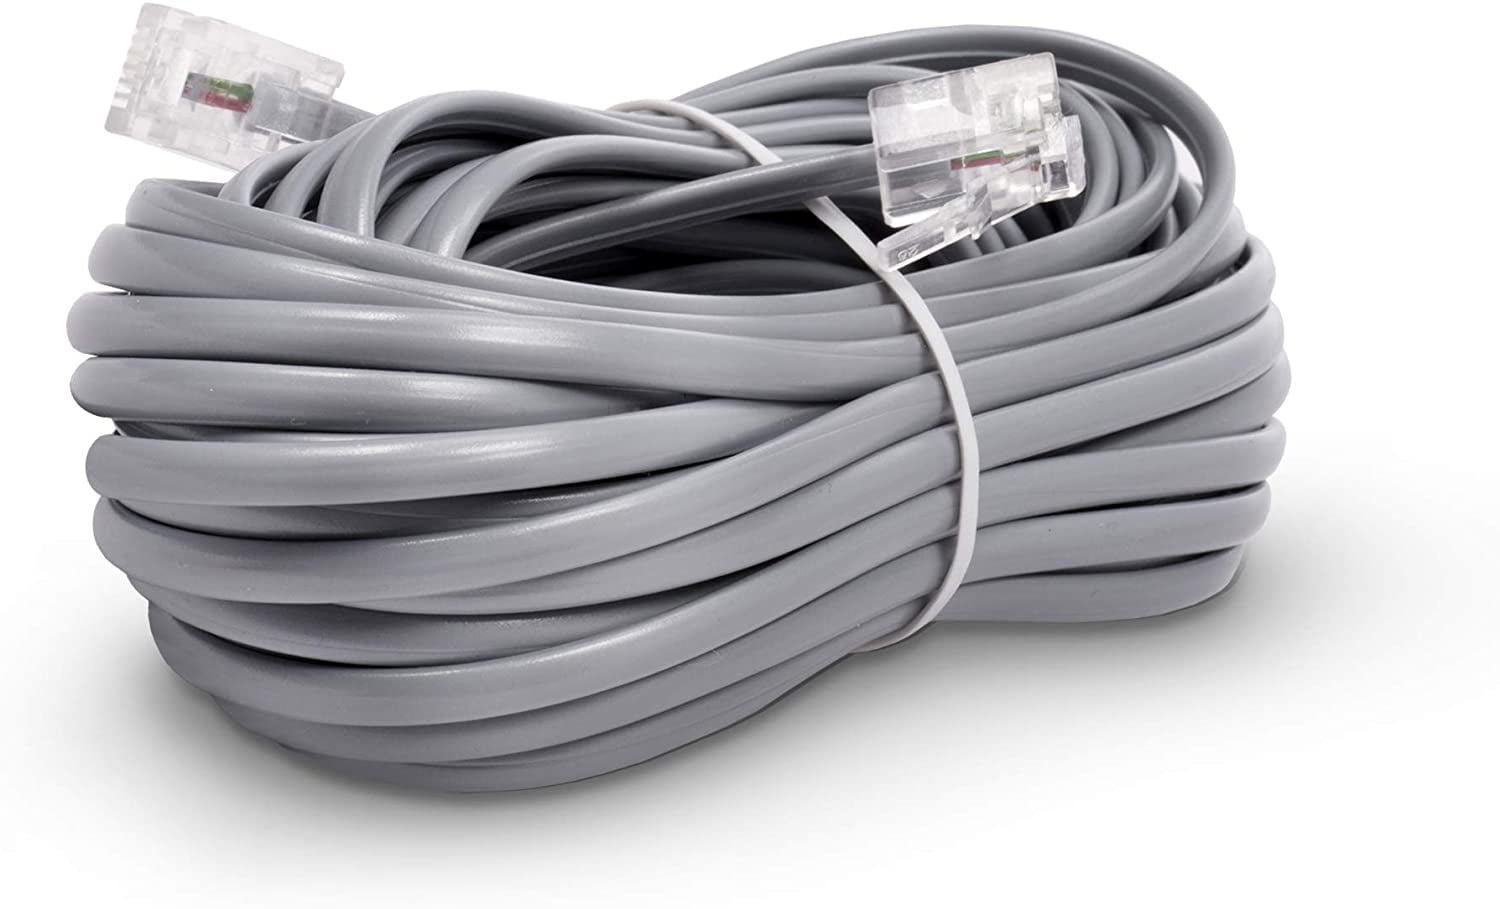 7 FT feet RJ11 6P6C Modular Telephone Extension Cable Phone Cord Line Wire Gray 